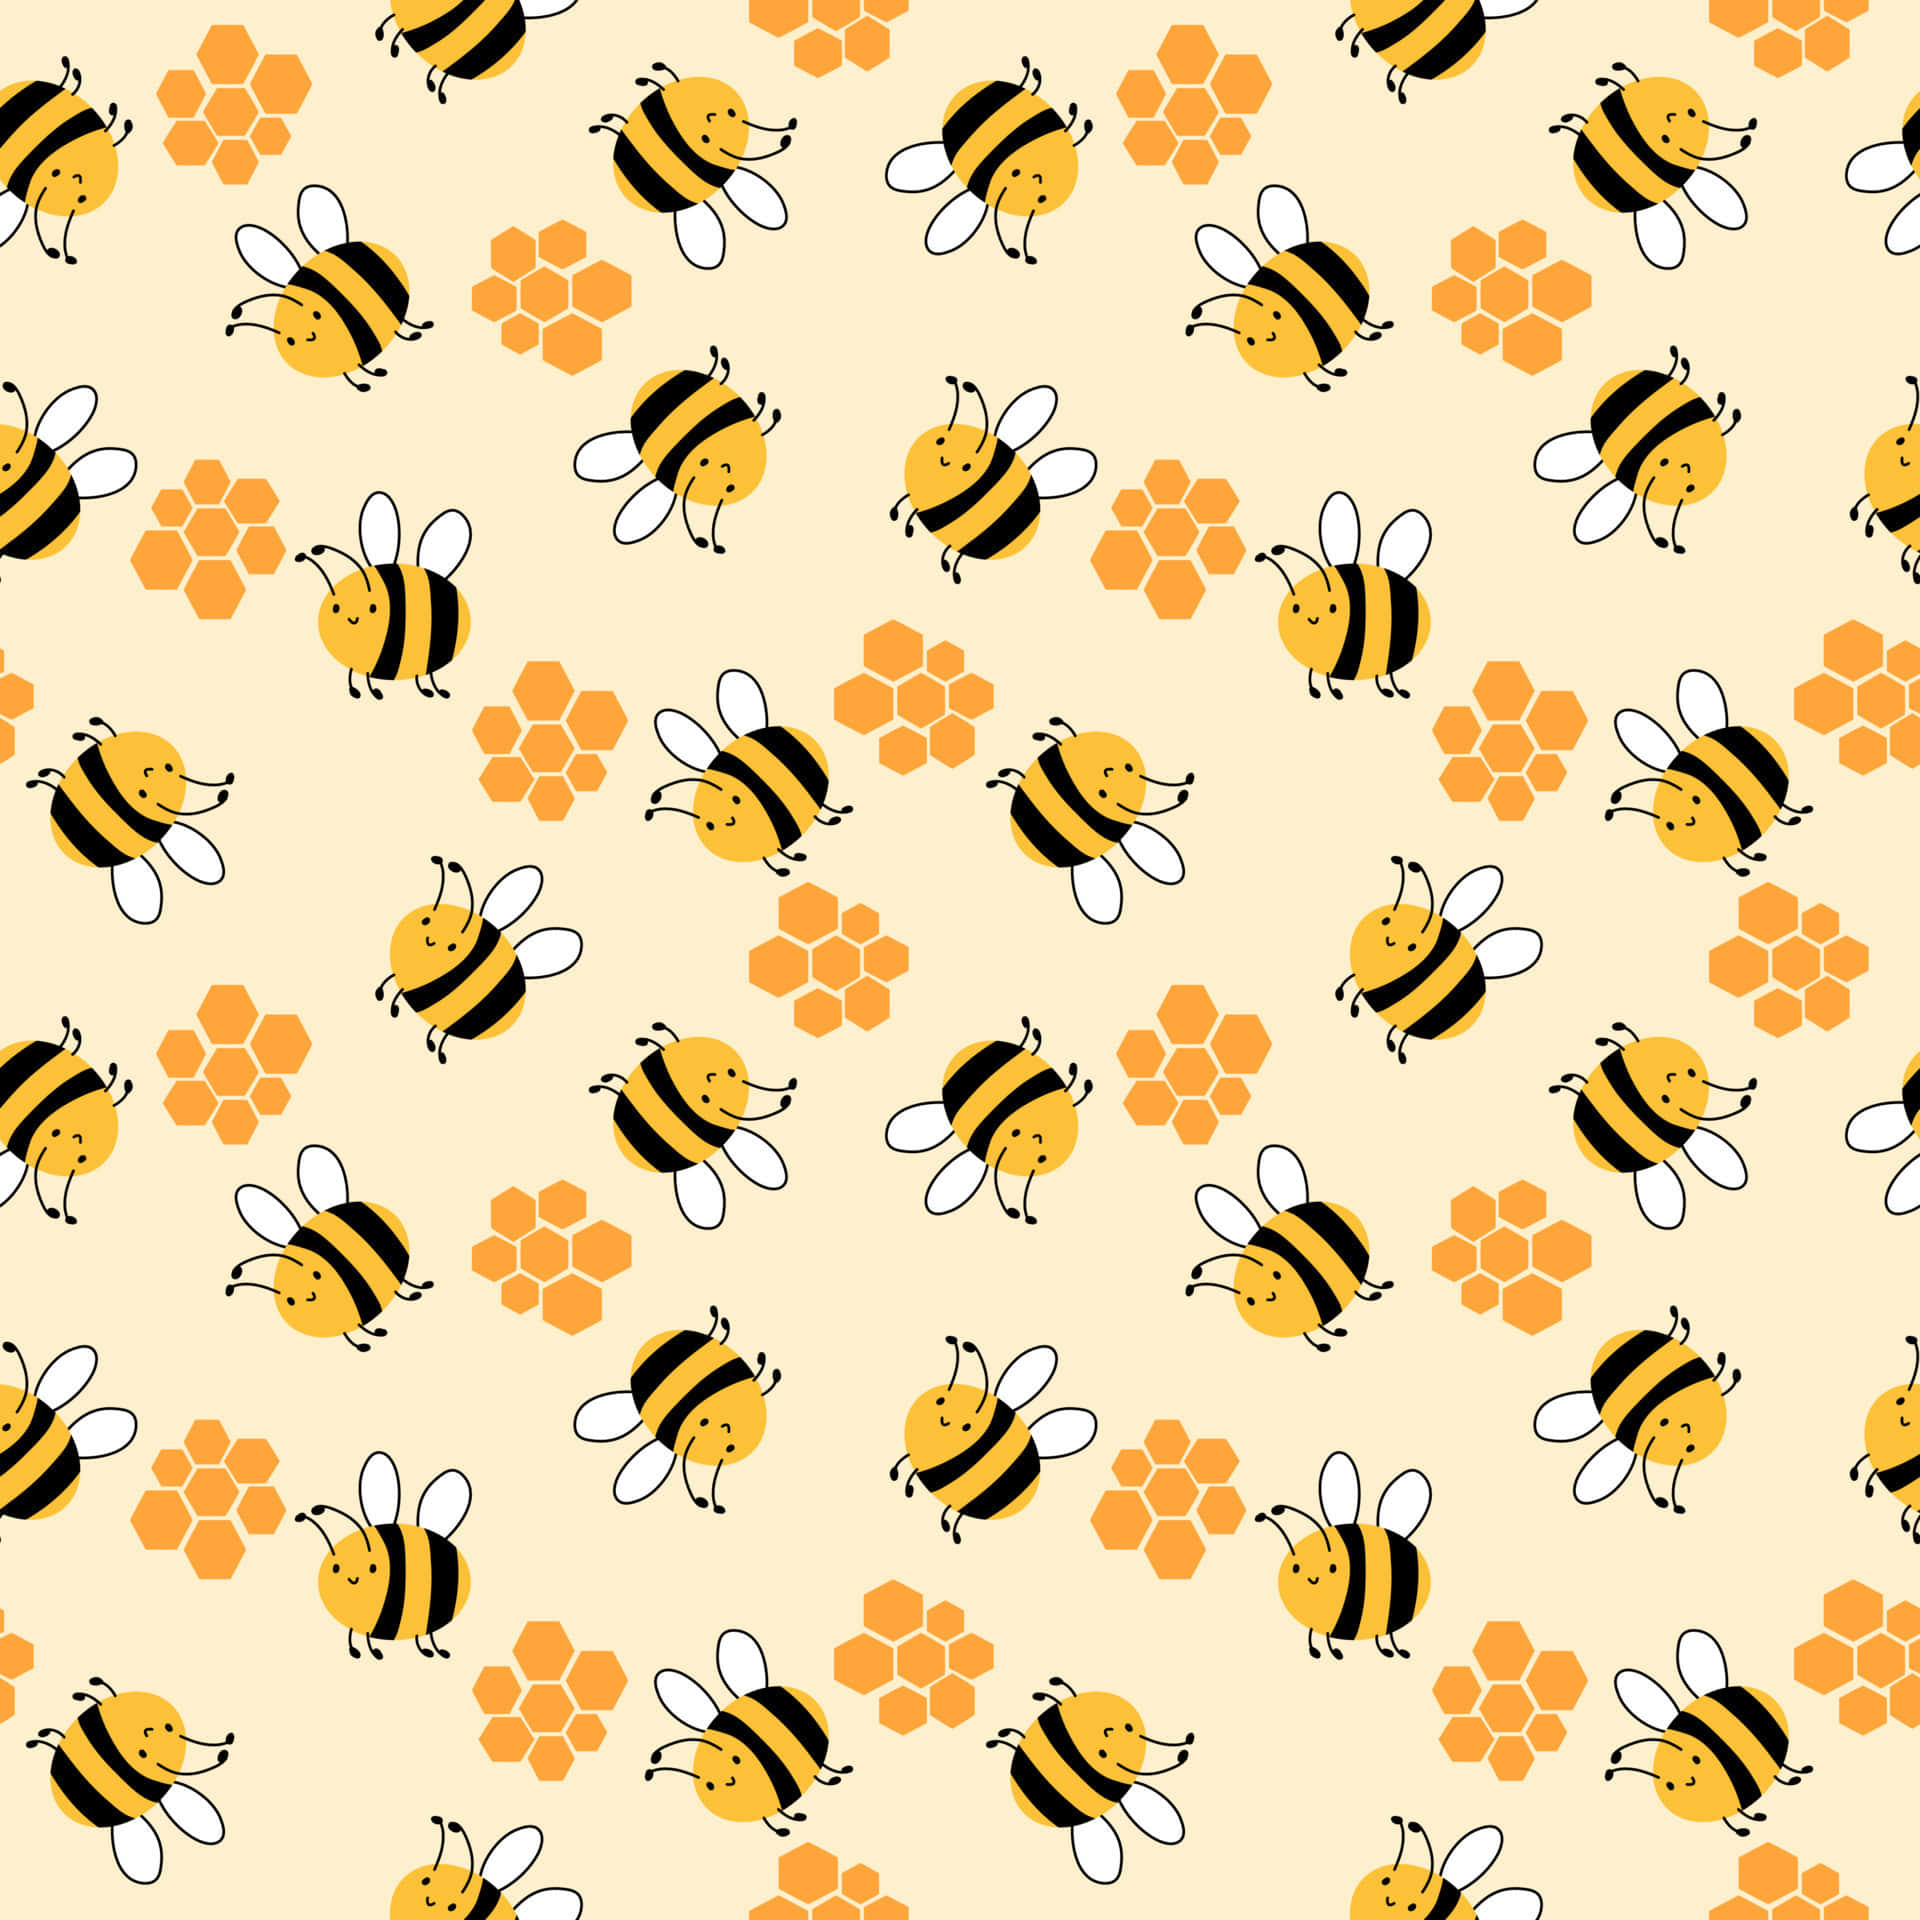 A Bee Pattern With Orange And Yellow Flowers